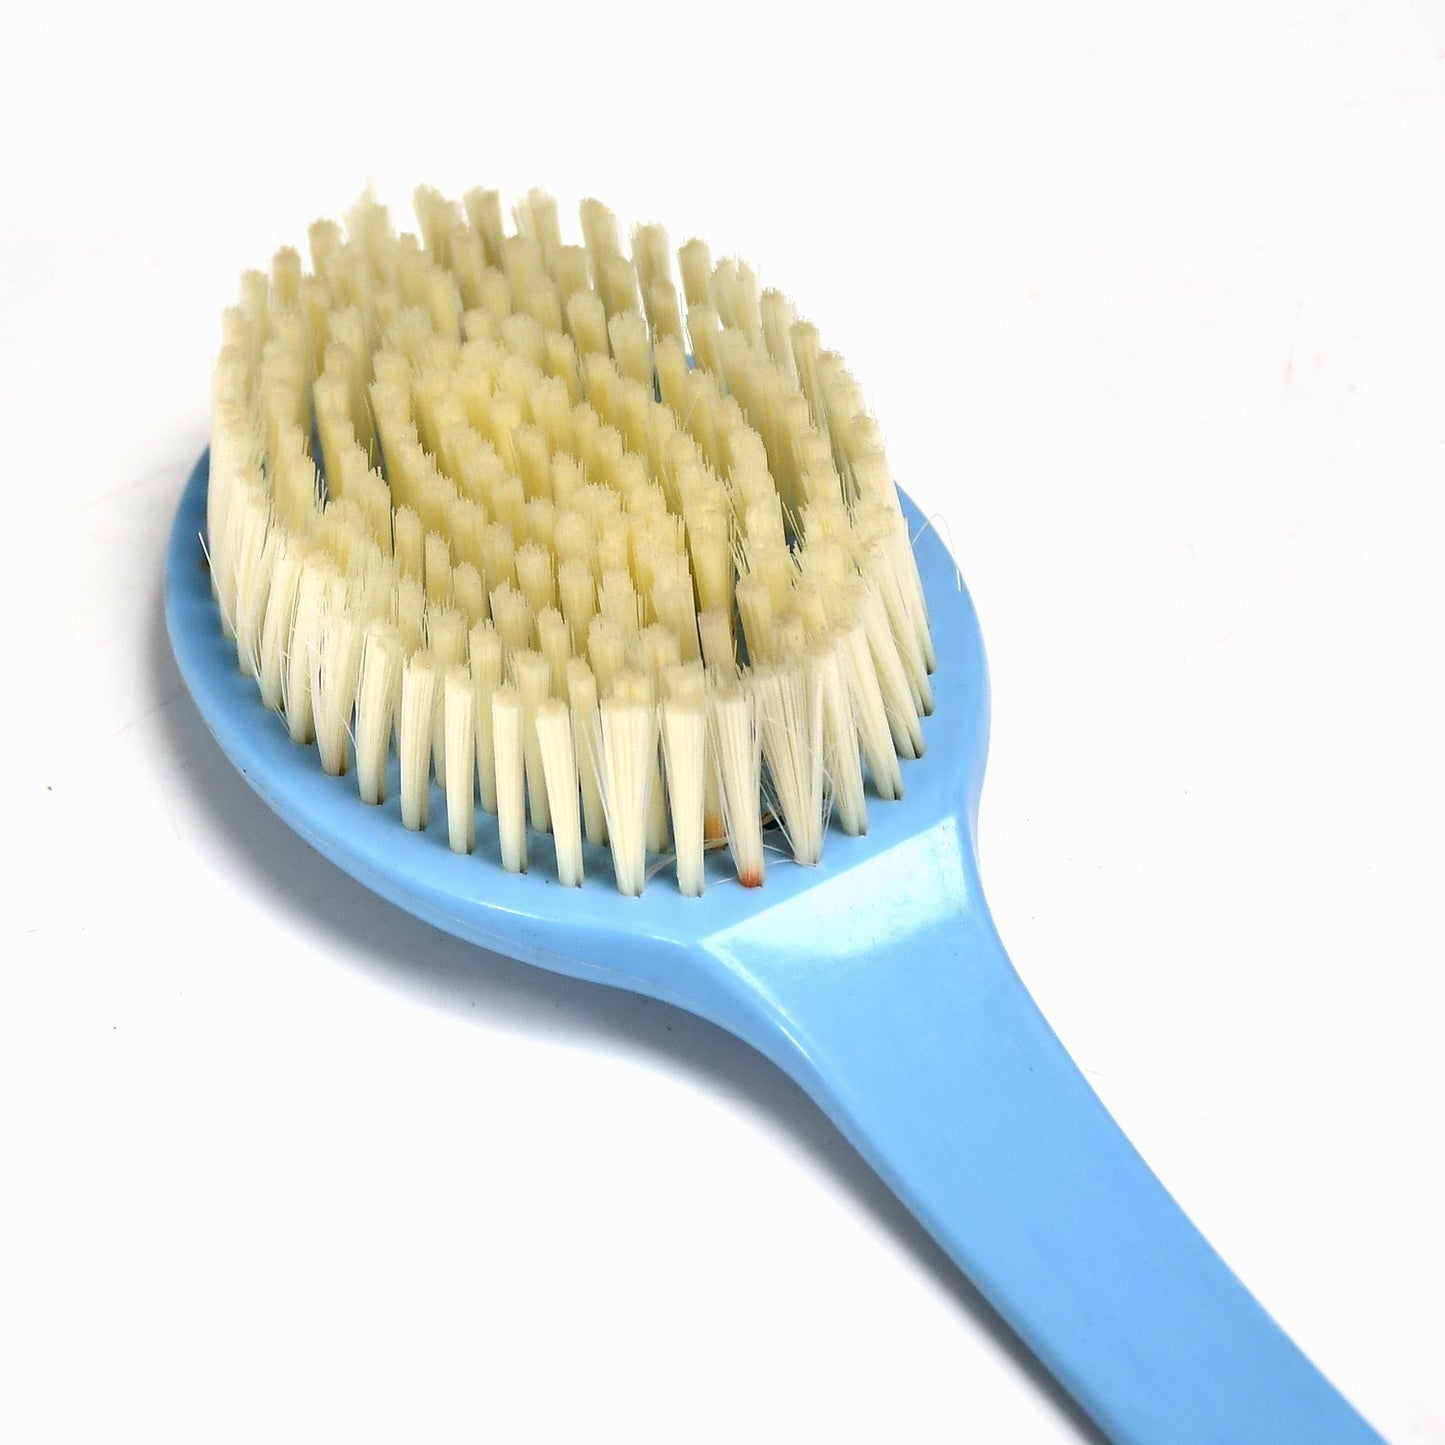 6664 Bath Brush with Bristles, Long Handle for Exfoliating Back, Body, and Feet, Bath and Shower DeoDap